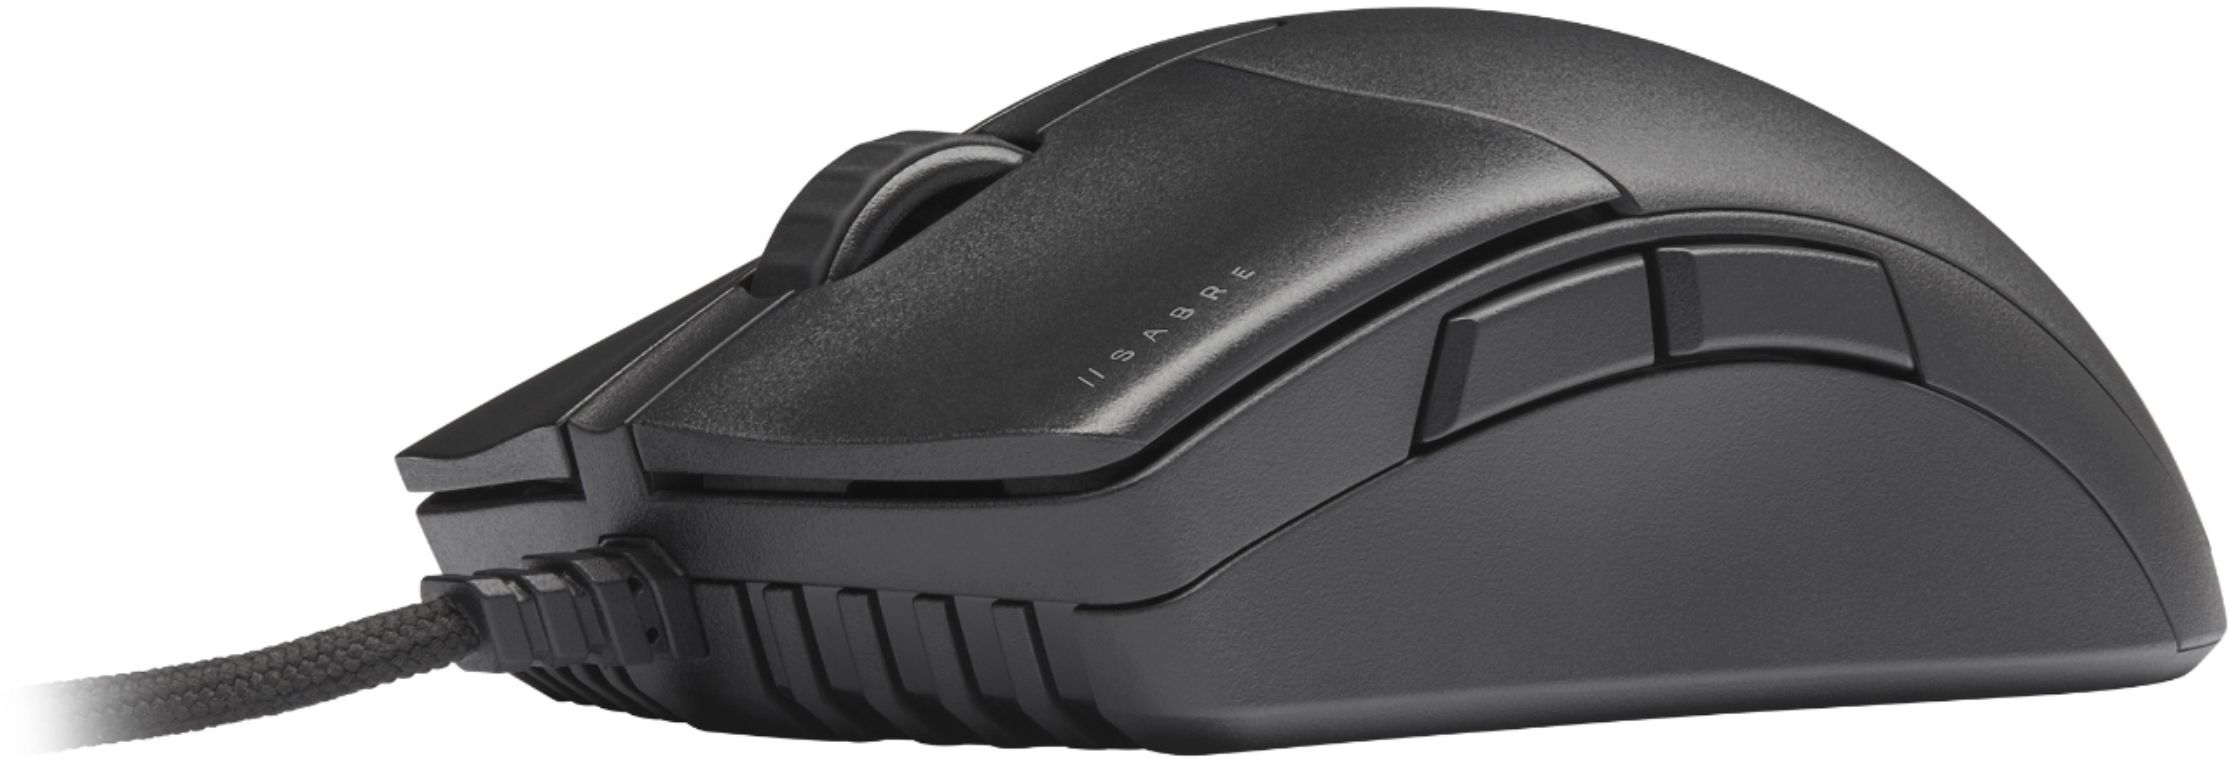 Left View: EVGA X17 Optical Gaming Mouse